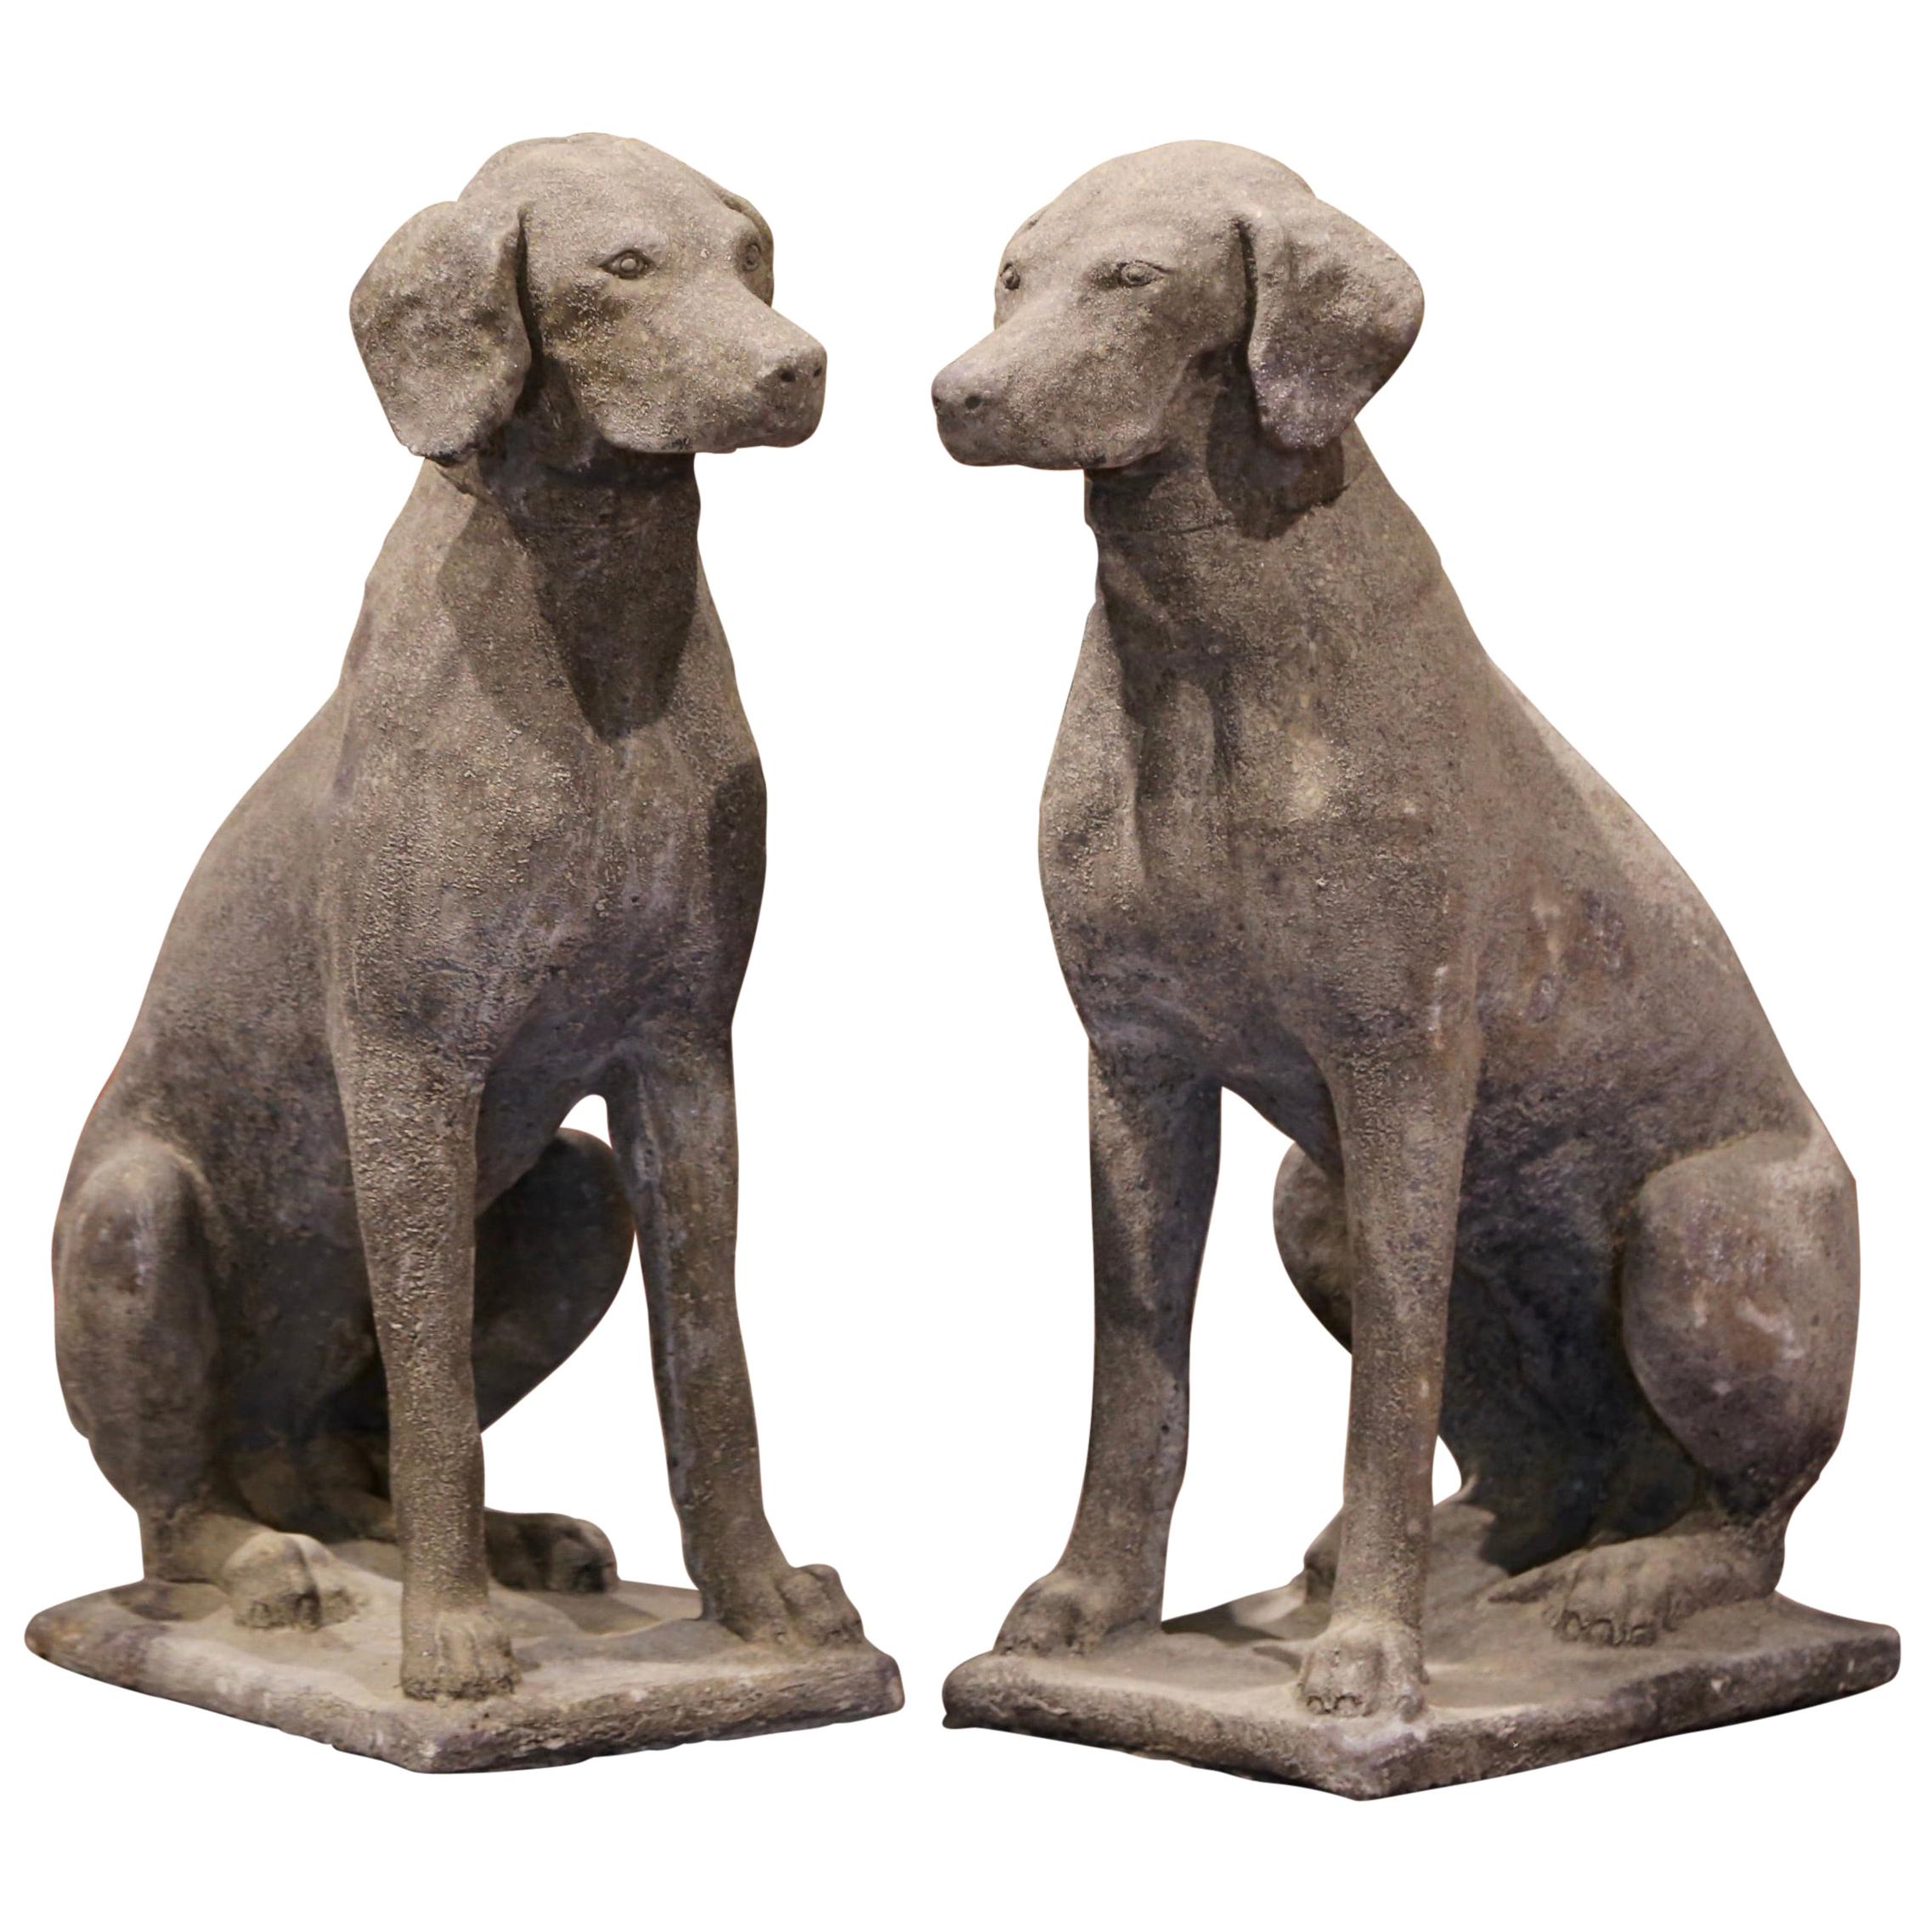 Pair of French Weathered Carved Stone Labrador Dog Sculptures Garden Statuary